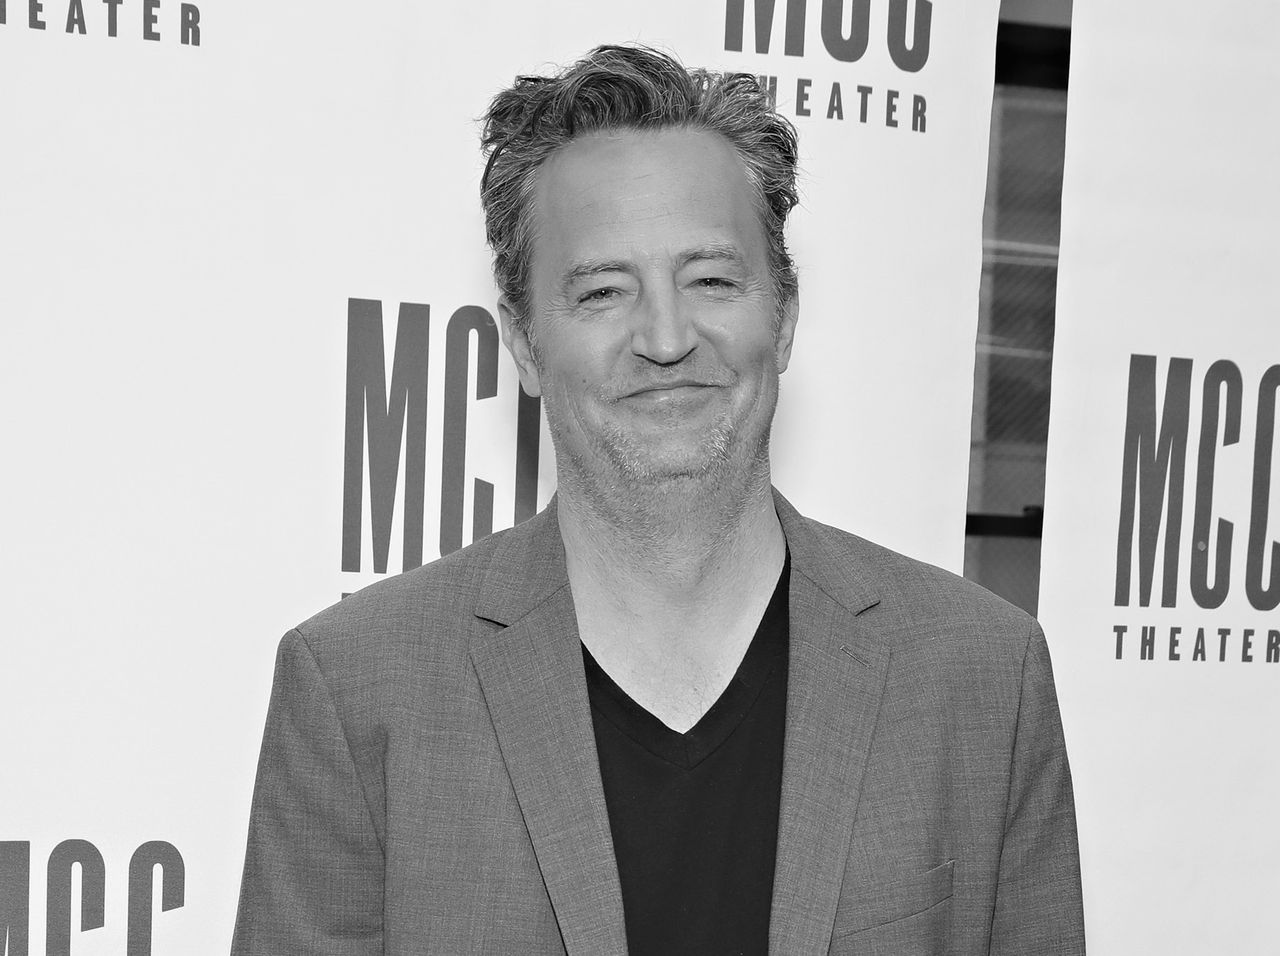 Unexpected result following autopsy of "Friends" star Matthew Perry